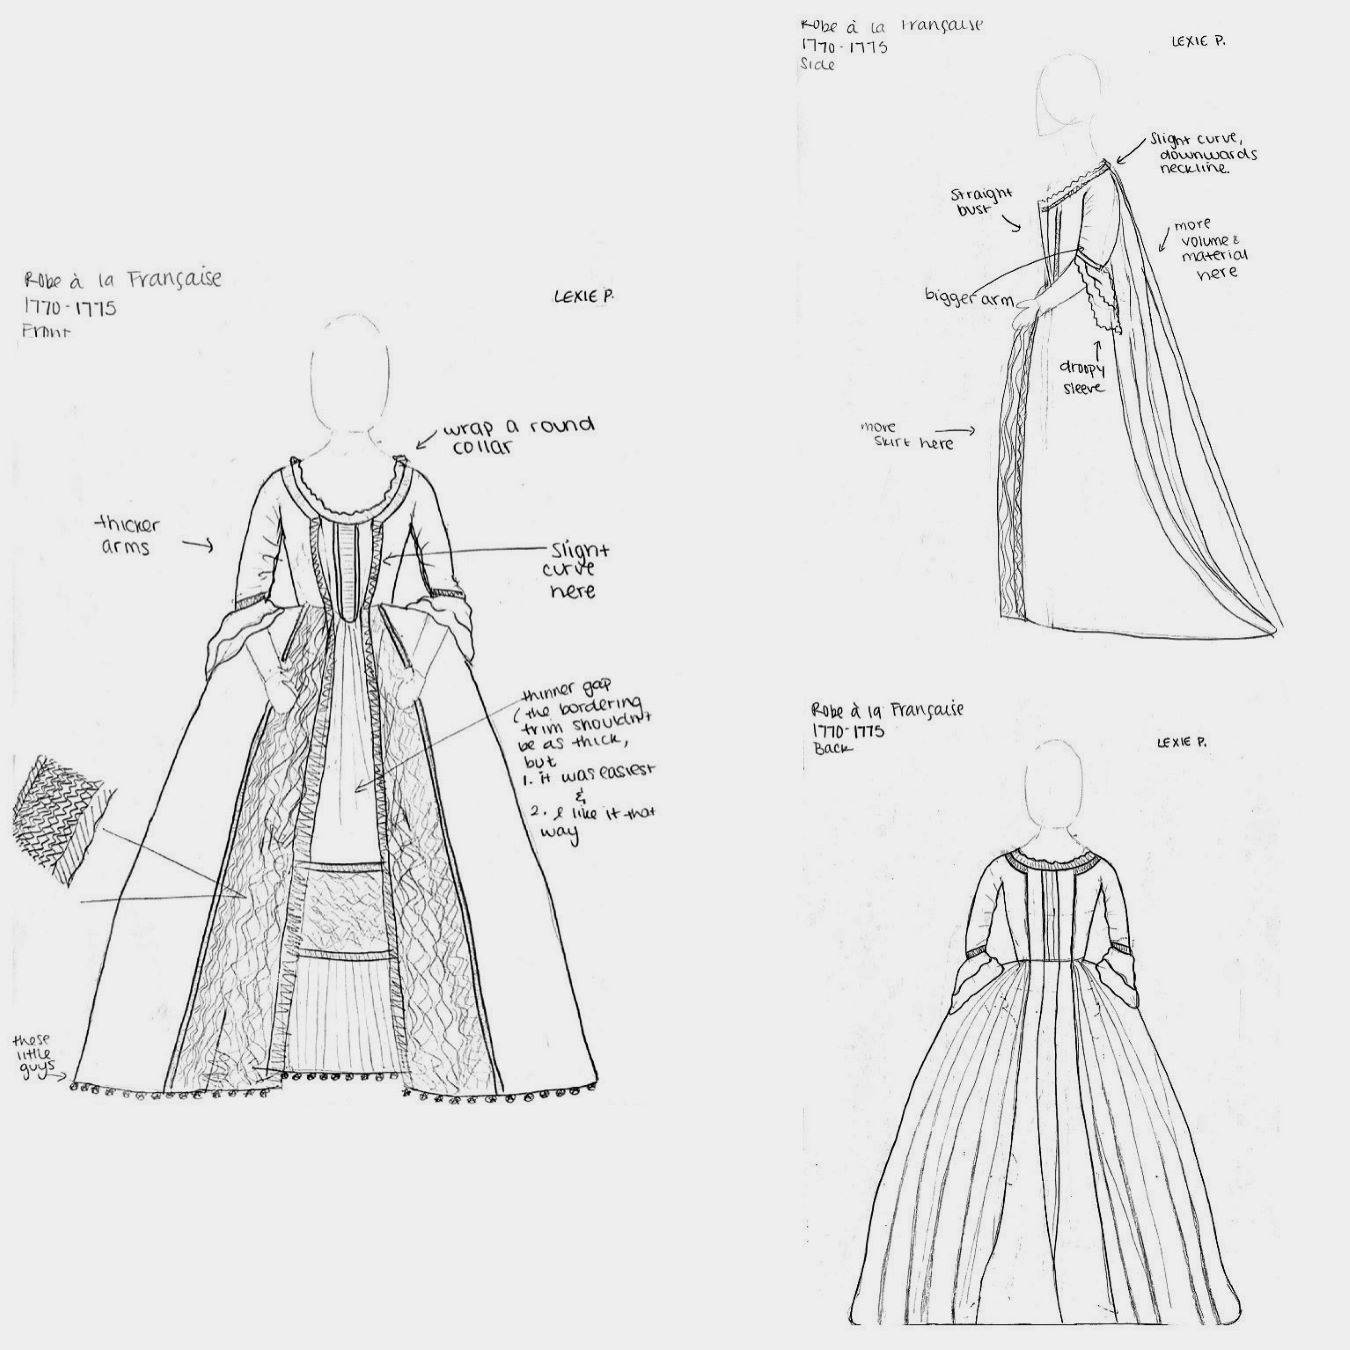 Sketch of french 1770 robe, part of history research project